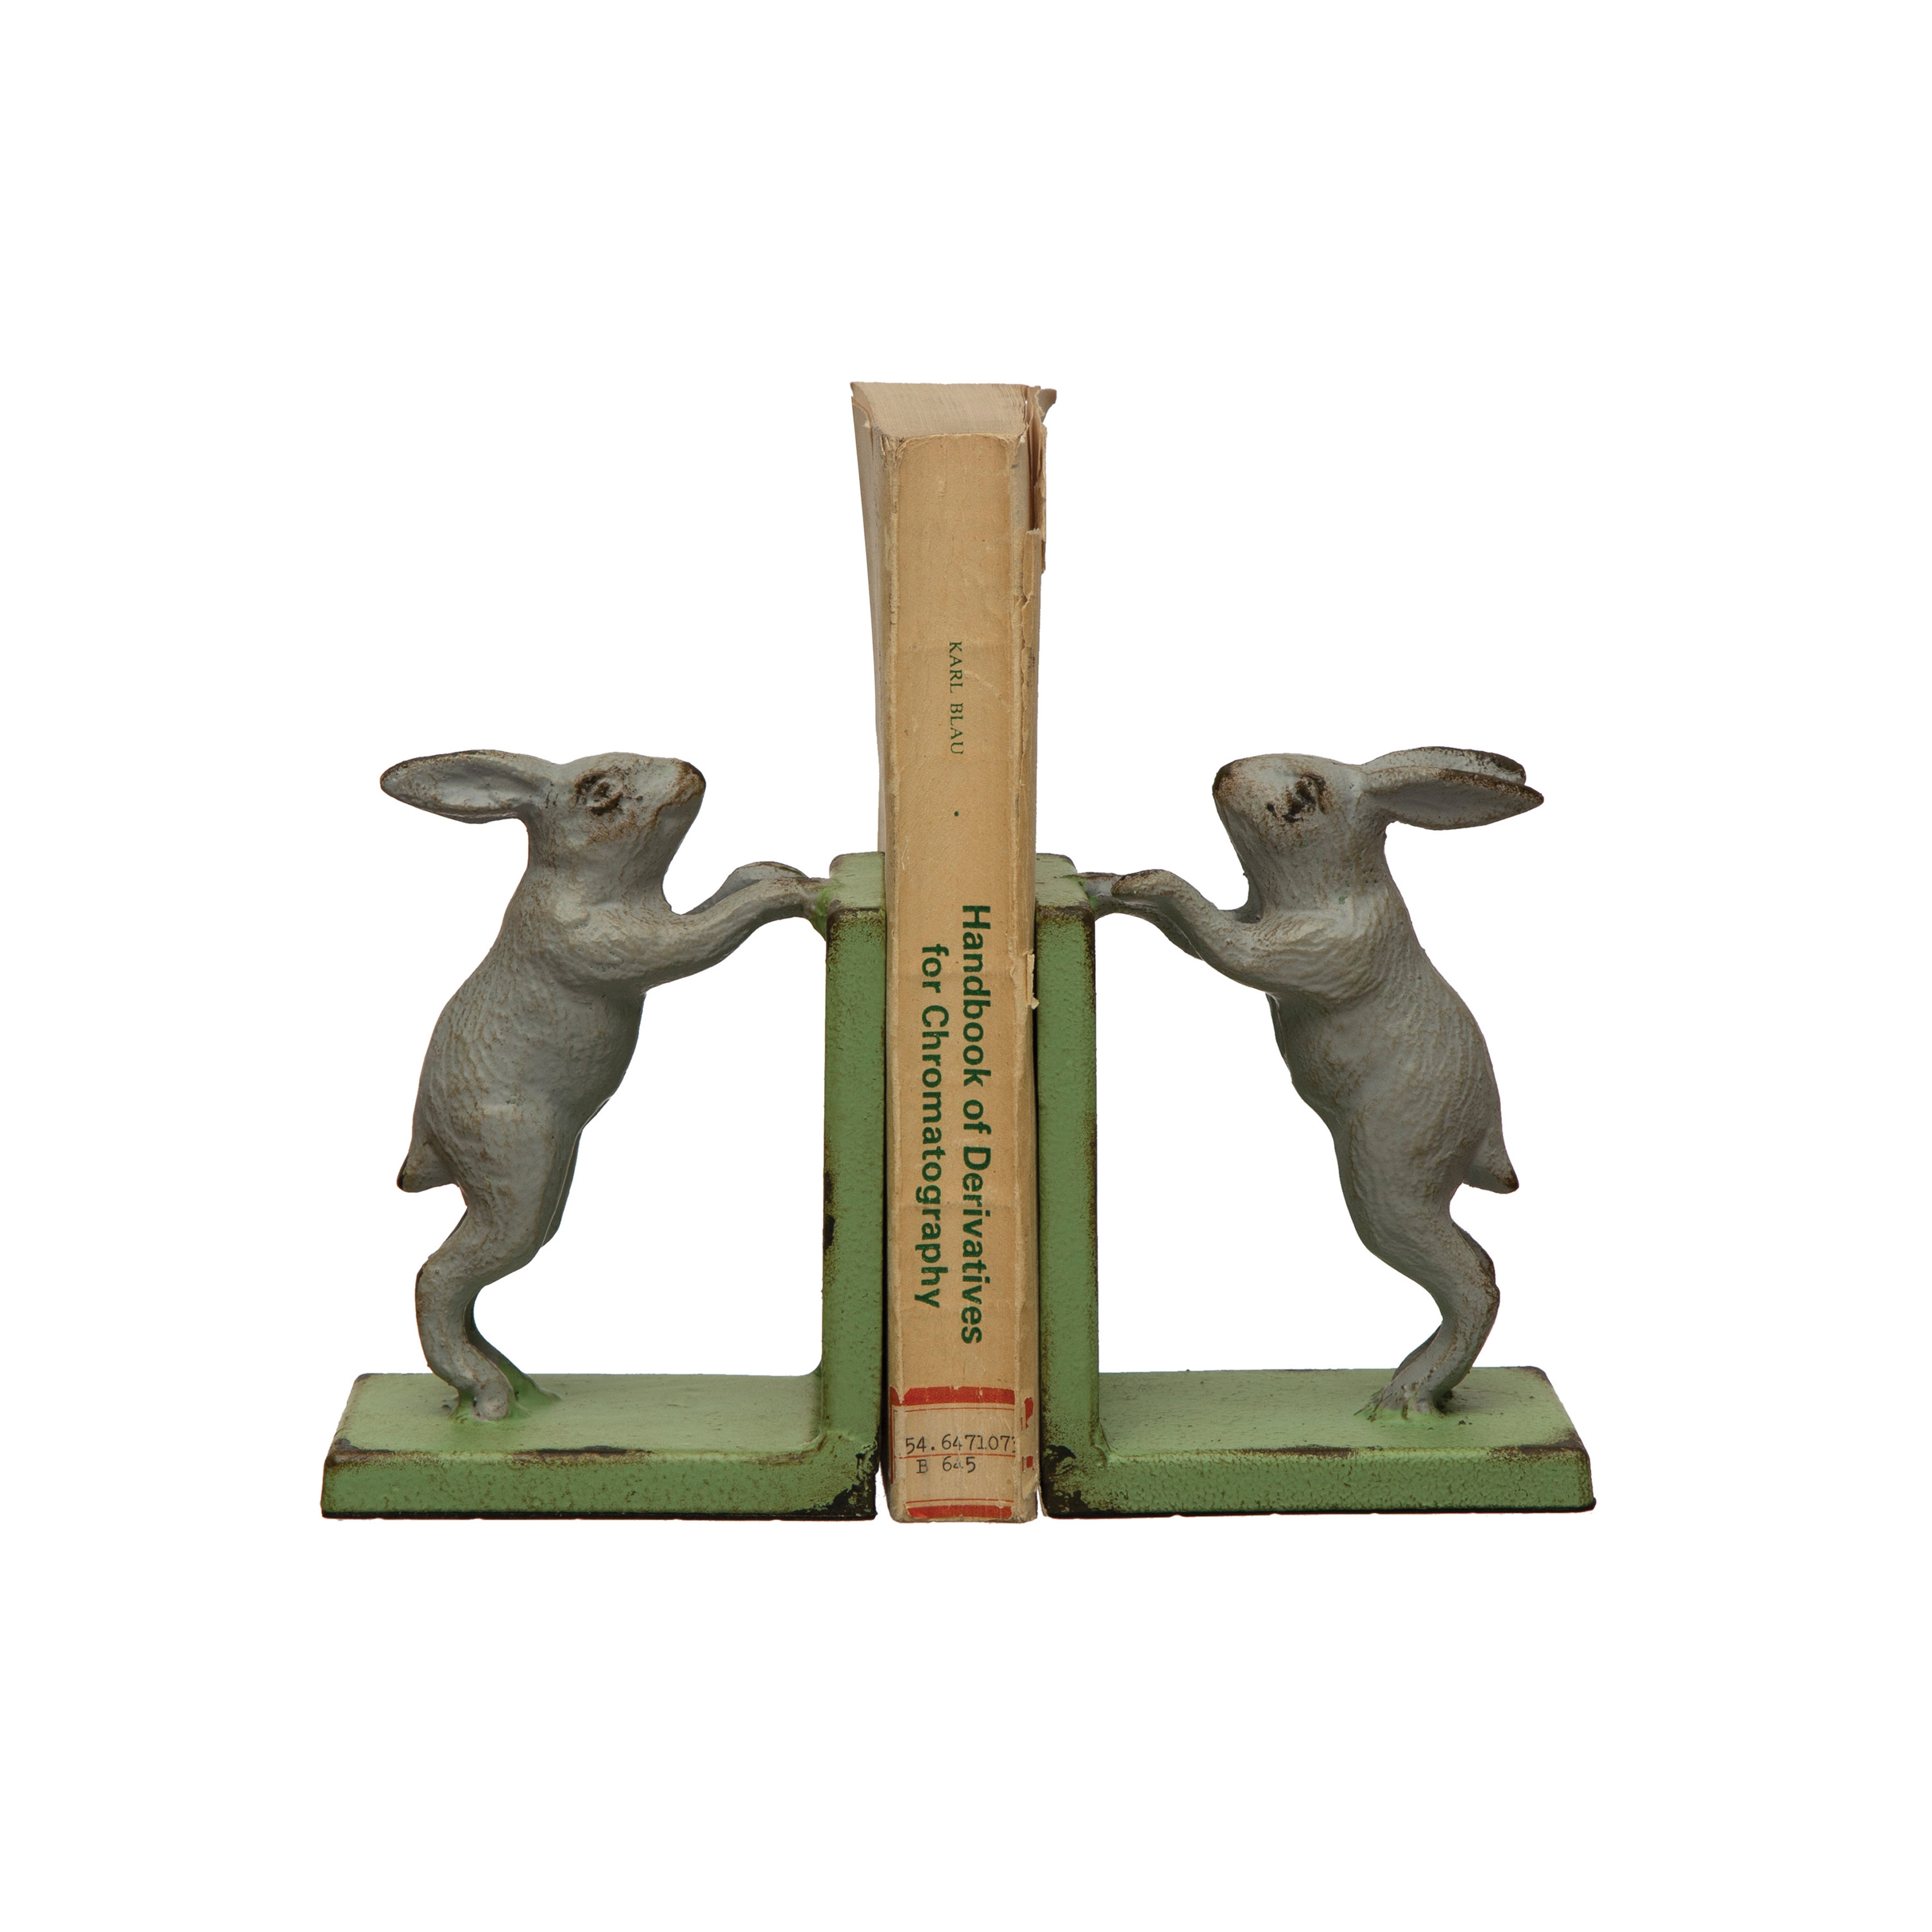 Decorative 2-Tone Cast Metal Rabbit Bookends, Green and Grey, Set of 2 - Image 0